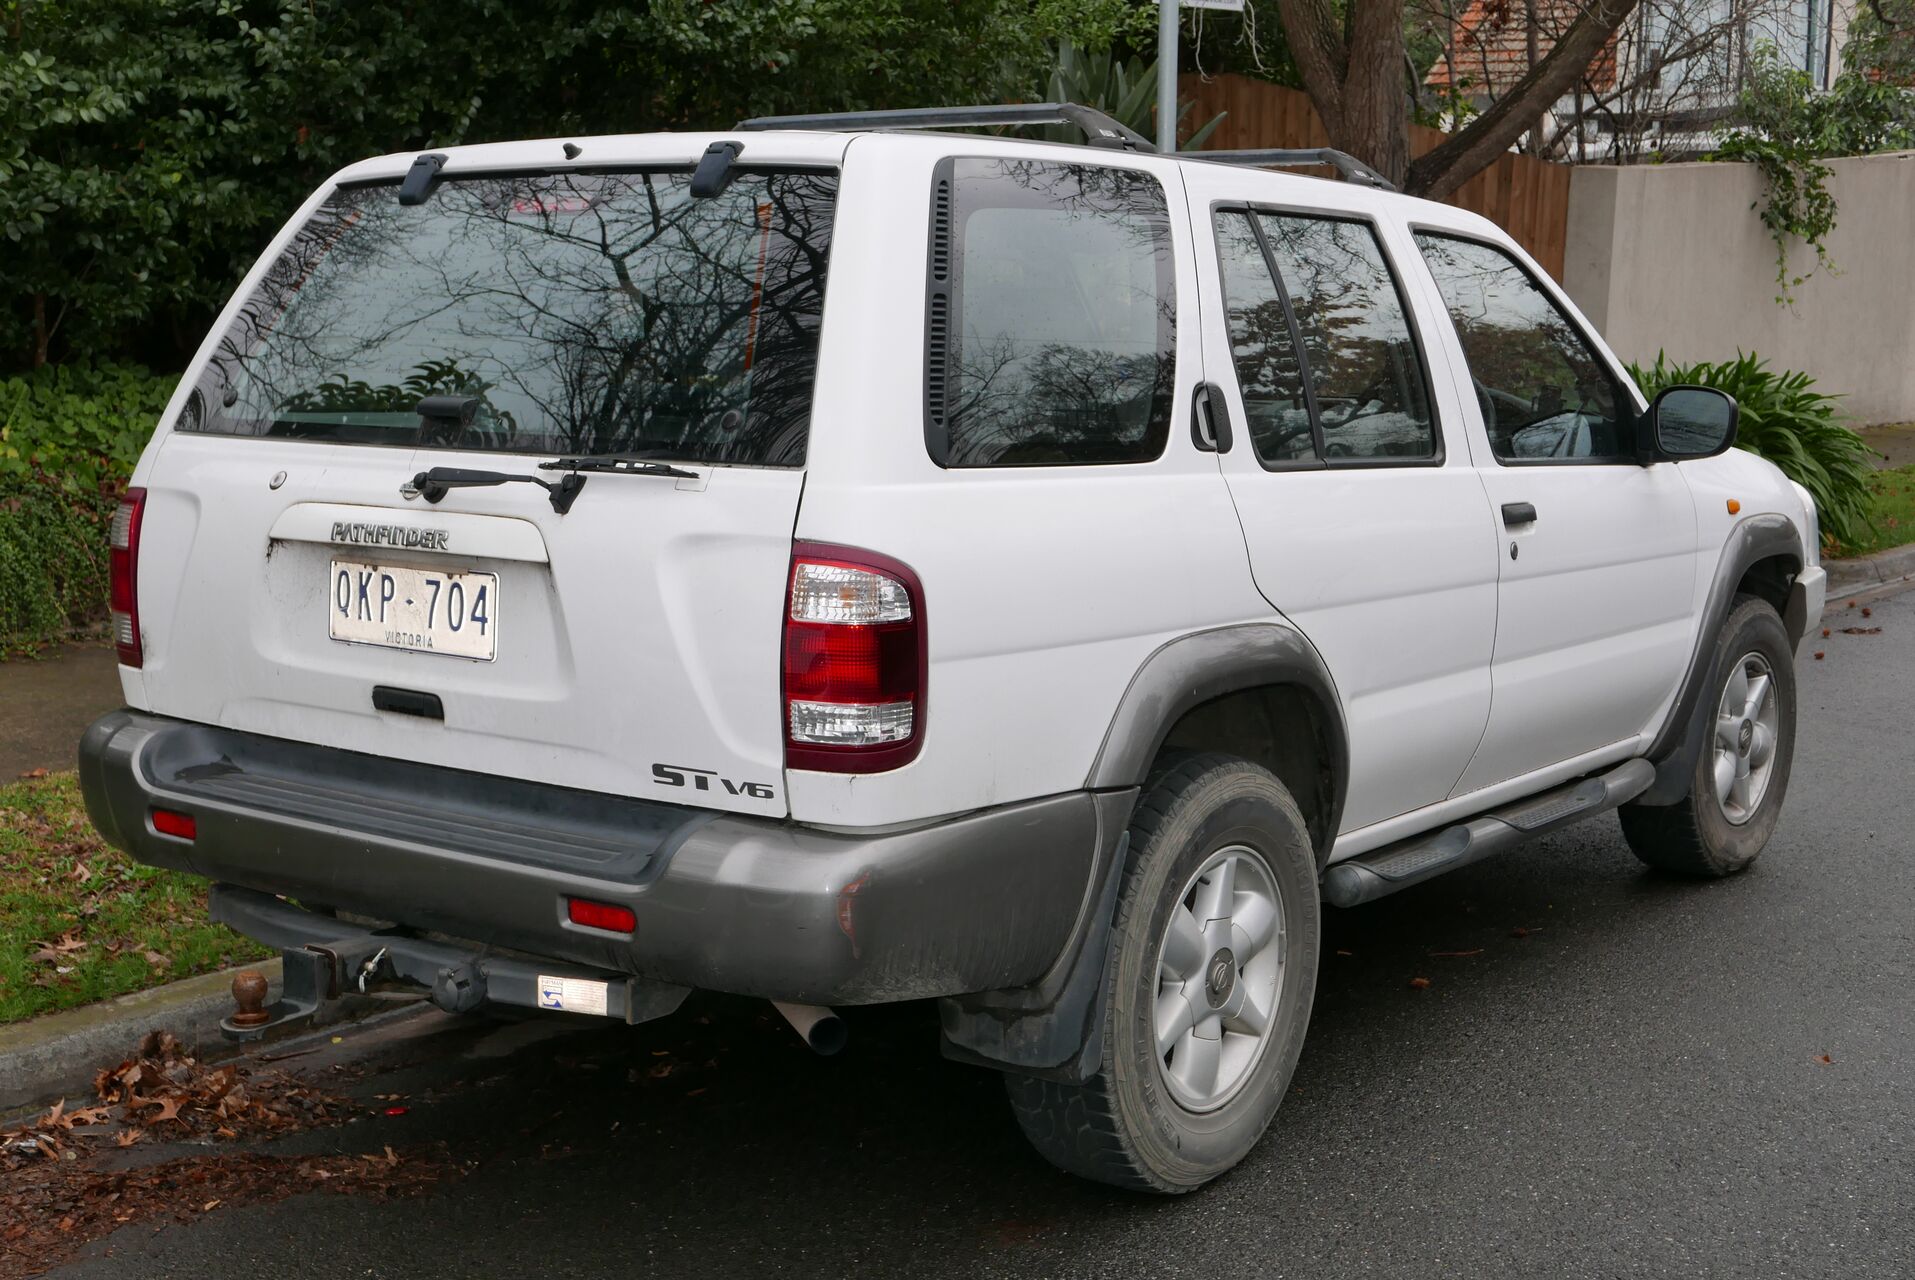 Nissan Pathfinder II 2.7 TD (131 Hp) 4WD 1997 2001 Specs and